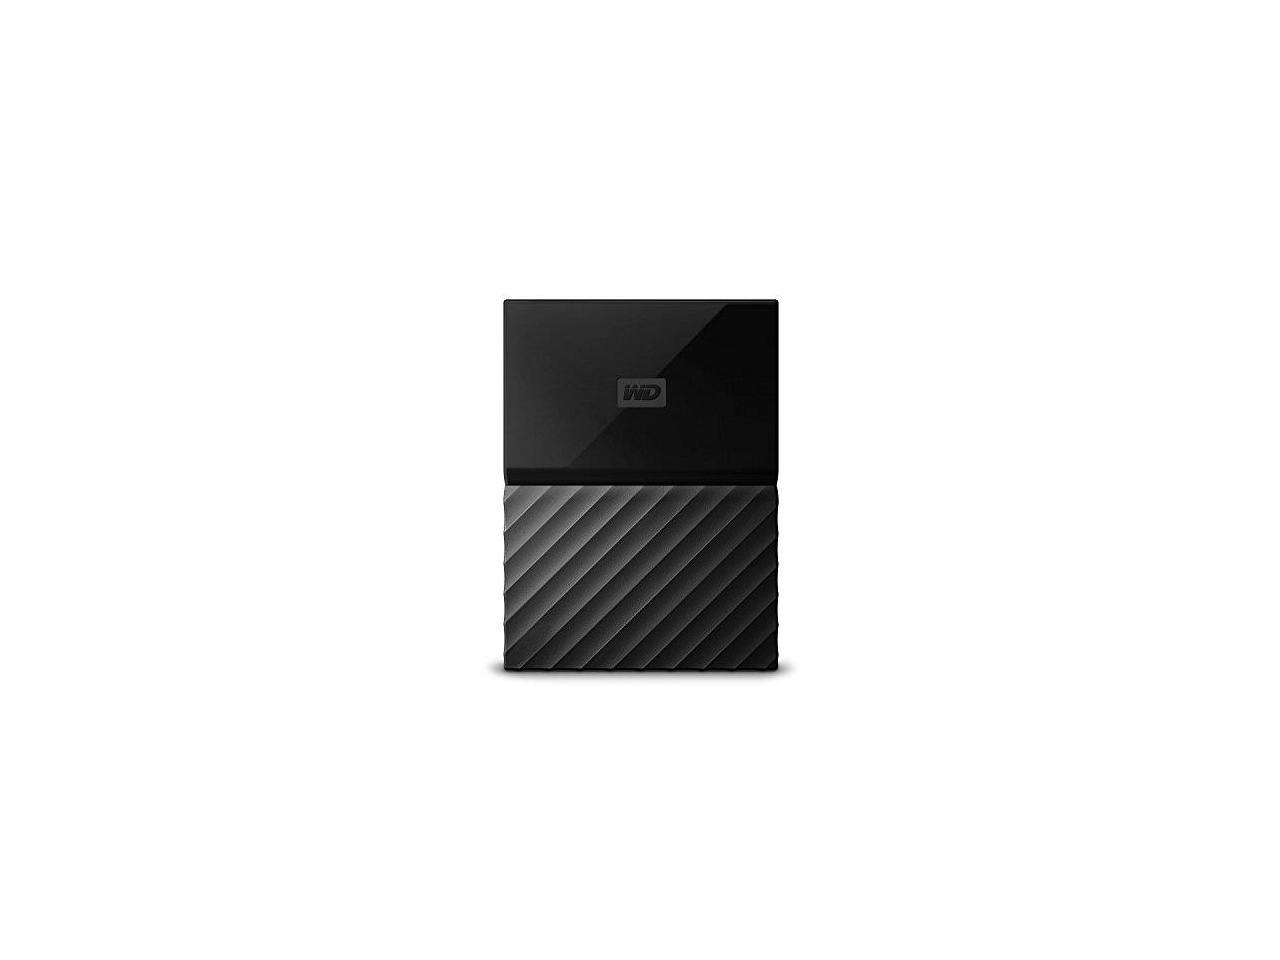 WD 3TB My Passport for Mac Portable Hard Drive - Time Machine Ready with Password Protection